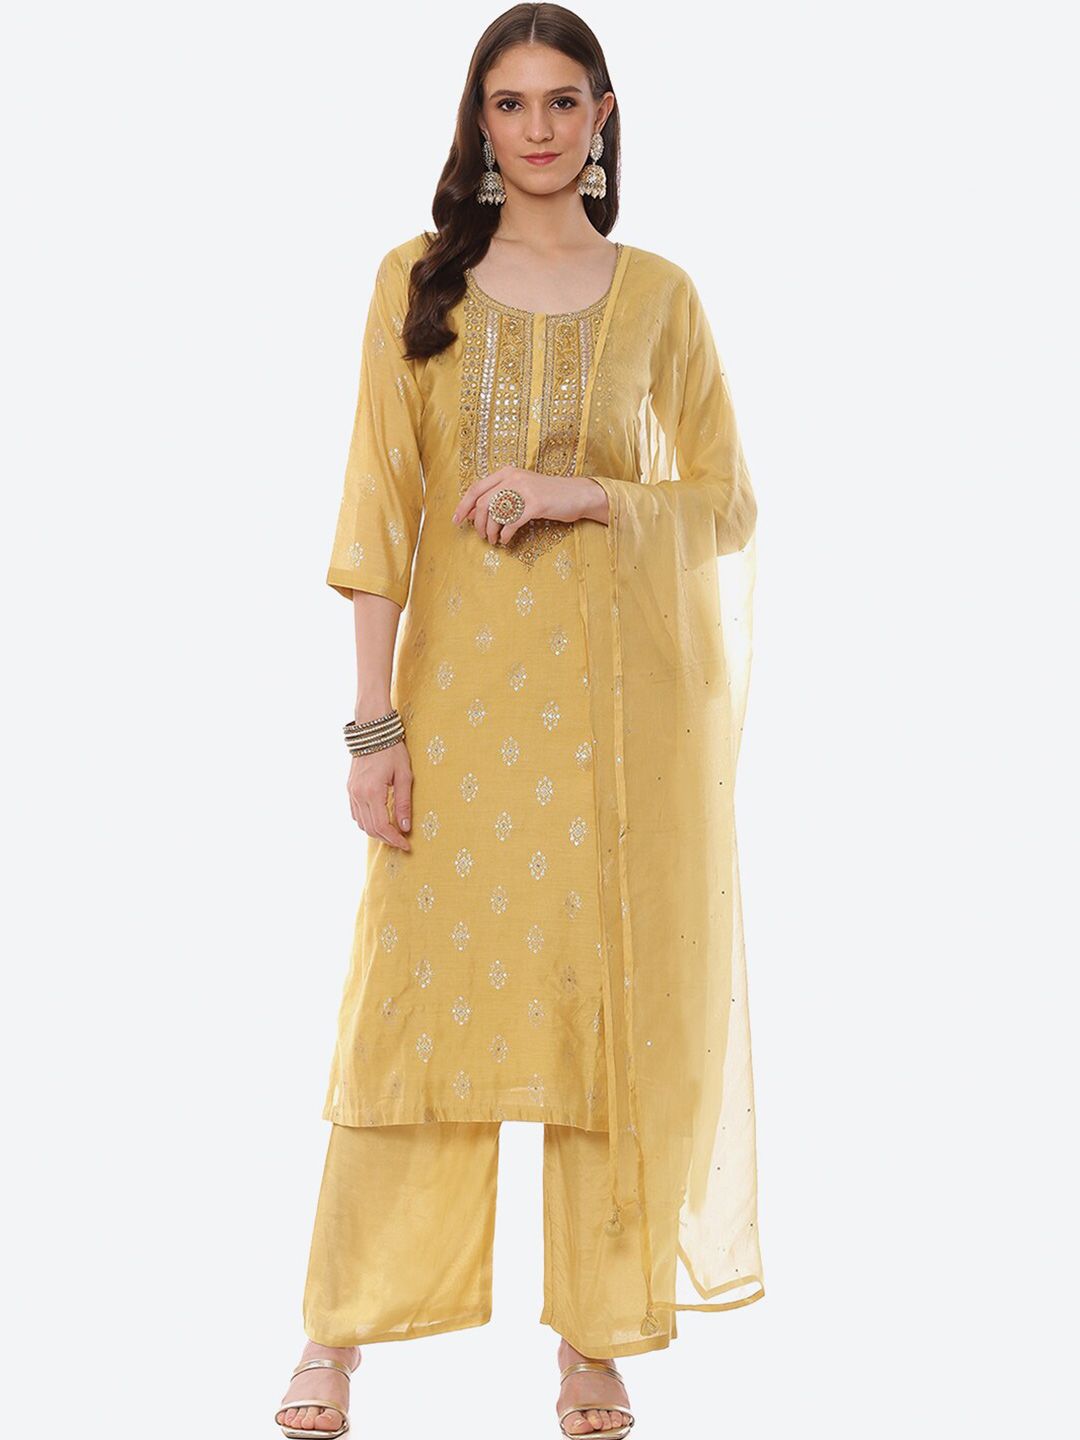 Biba Women Yellow & Silver-Toned Embellished Unstitched Dress Material Price in India